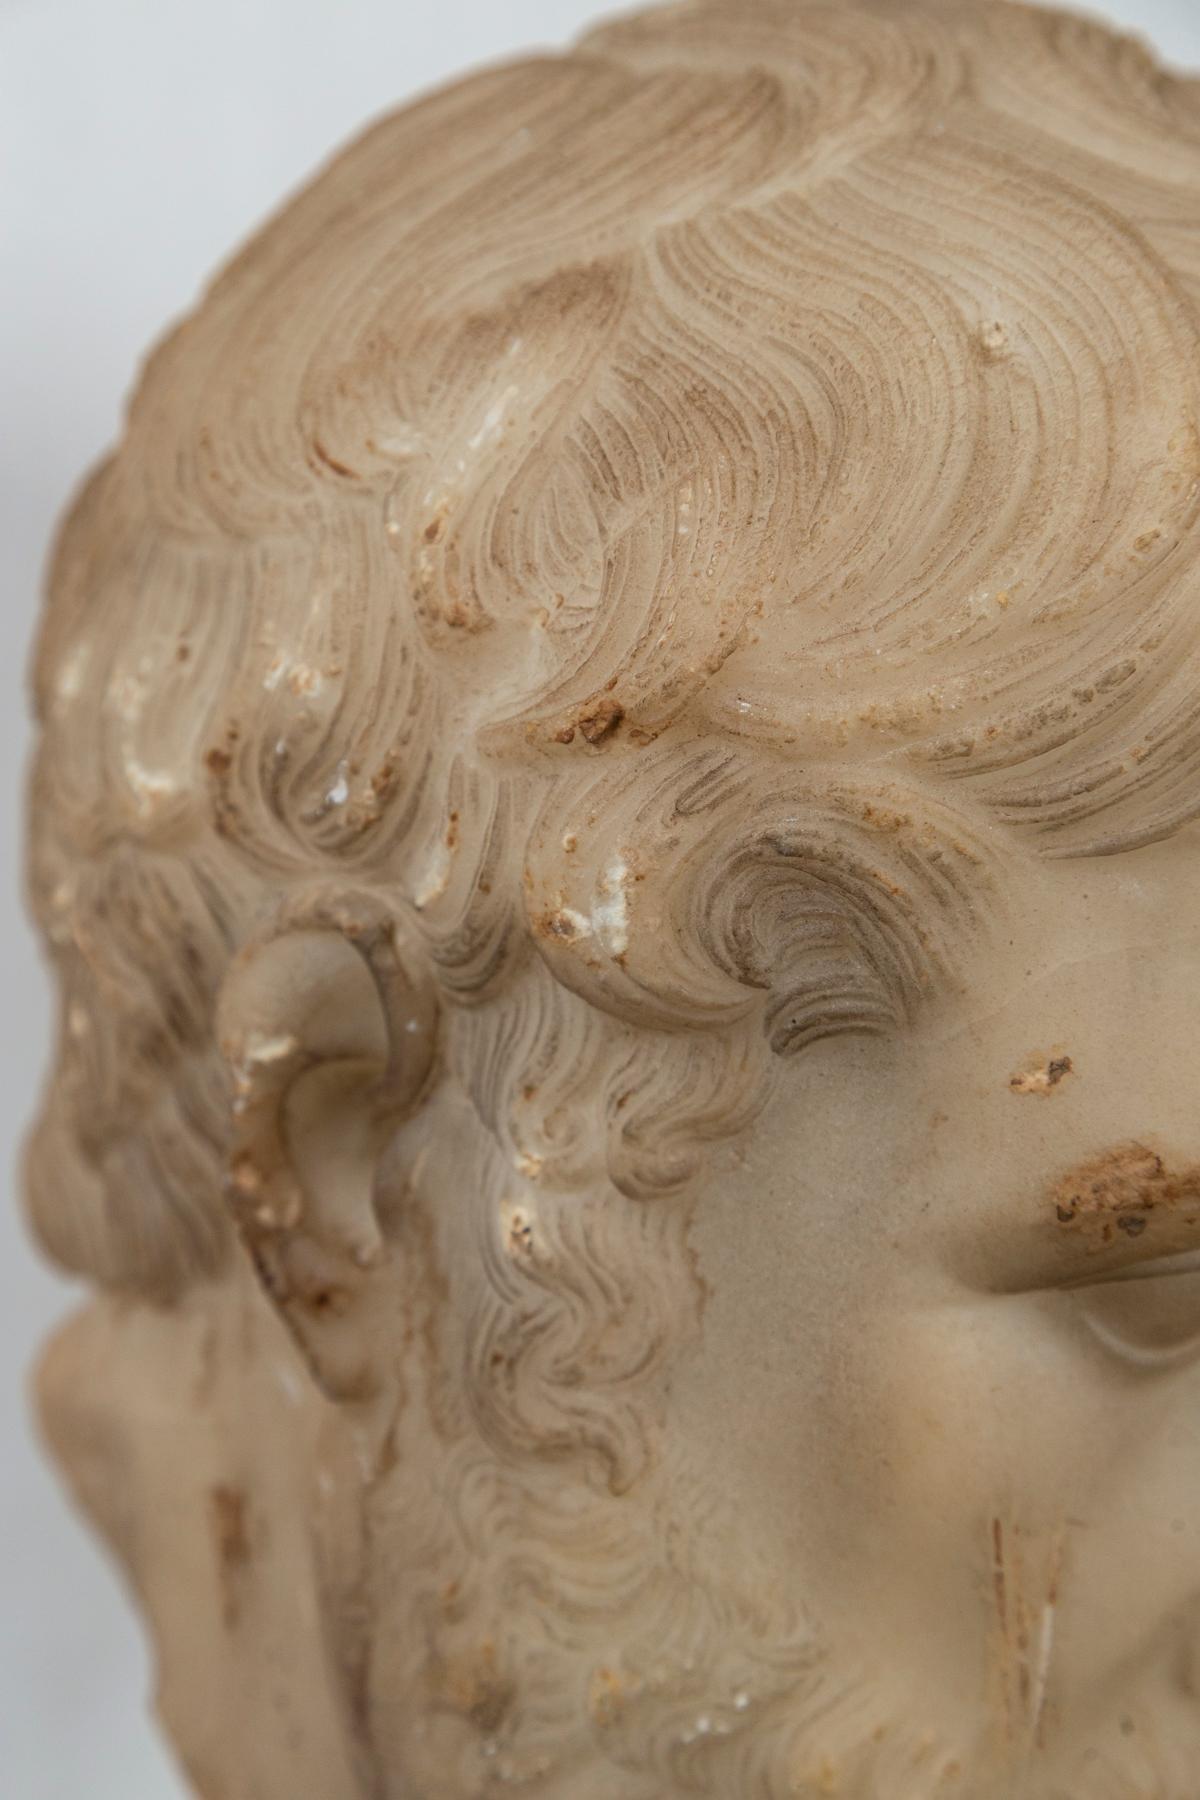 Alabaster Bust of a Greek or Roman Male on a Marble  Base 5